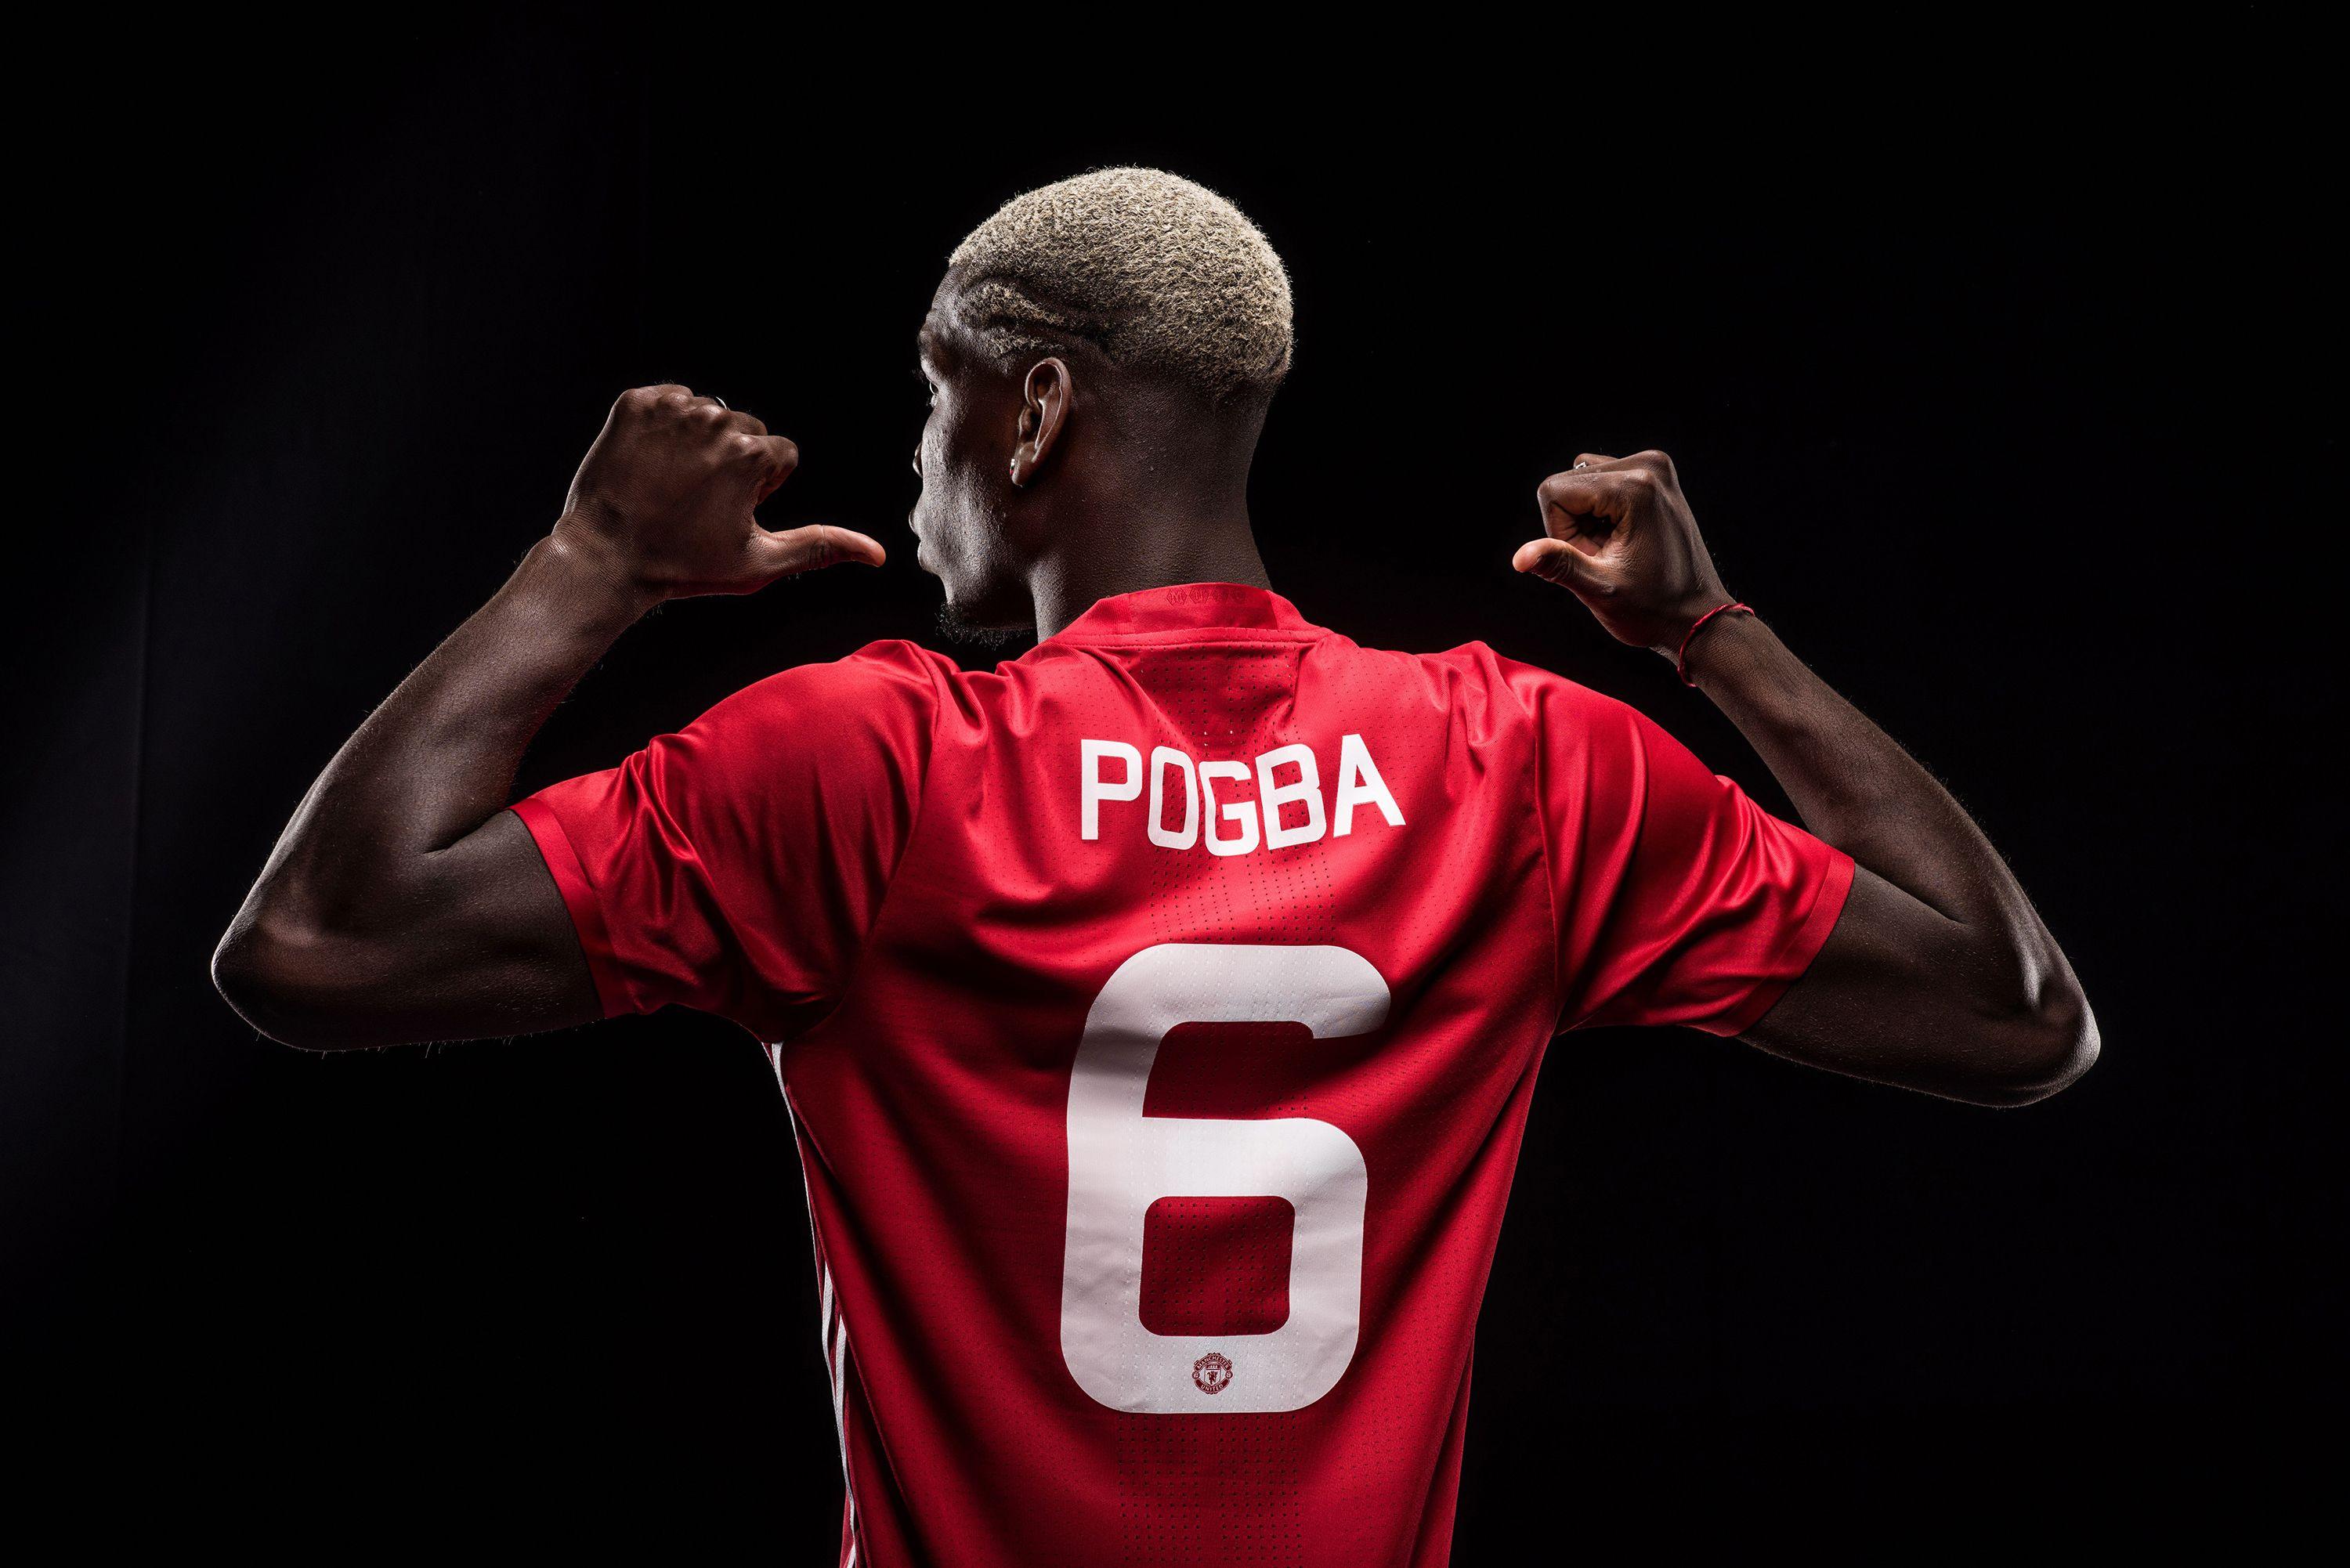 Pogba to wear number six at United Manchester United